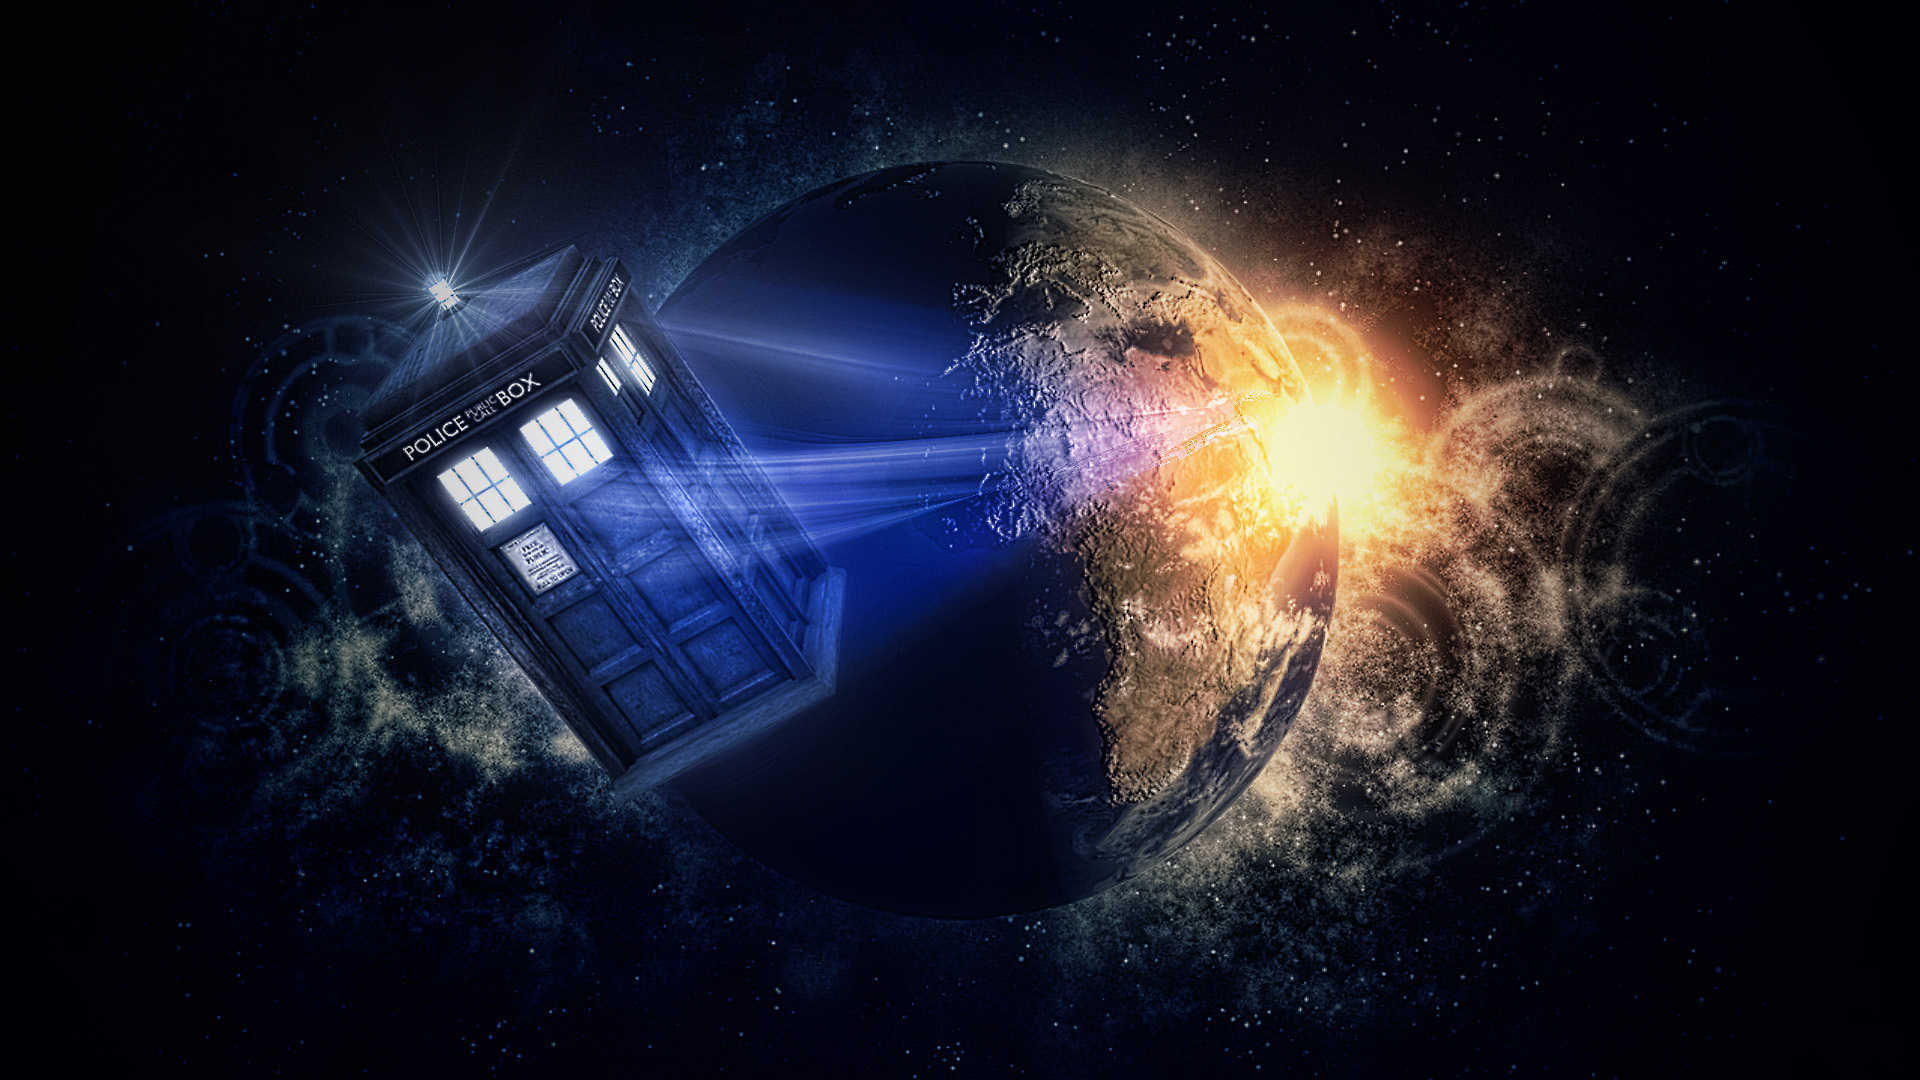 Doctor Who HD Wallpaper Is A Fantastic